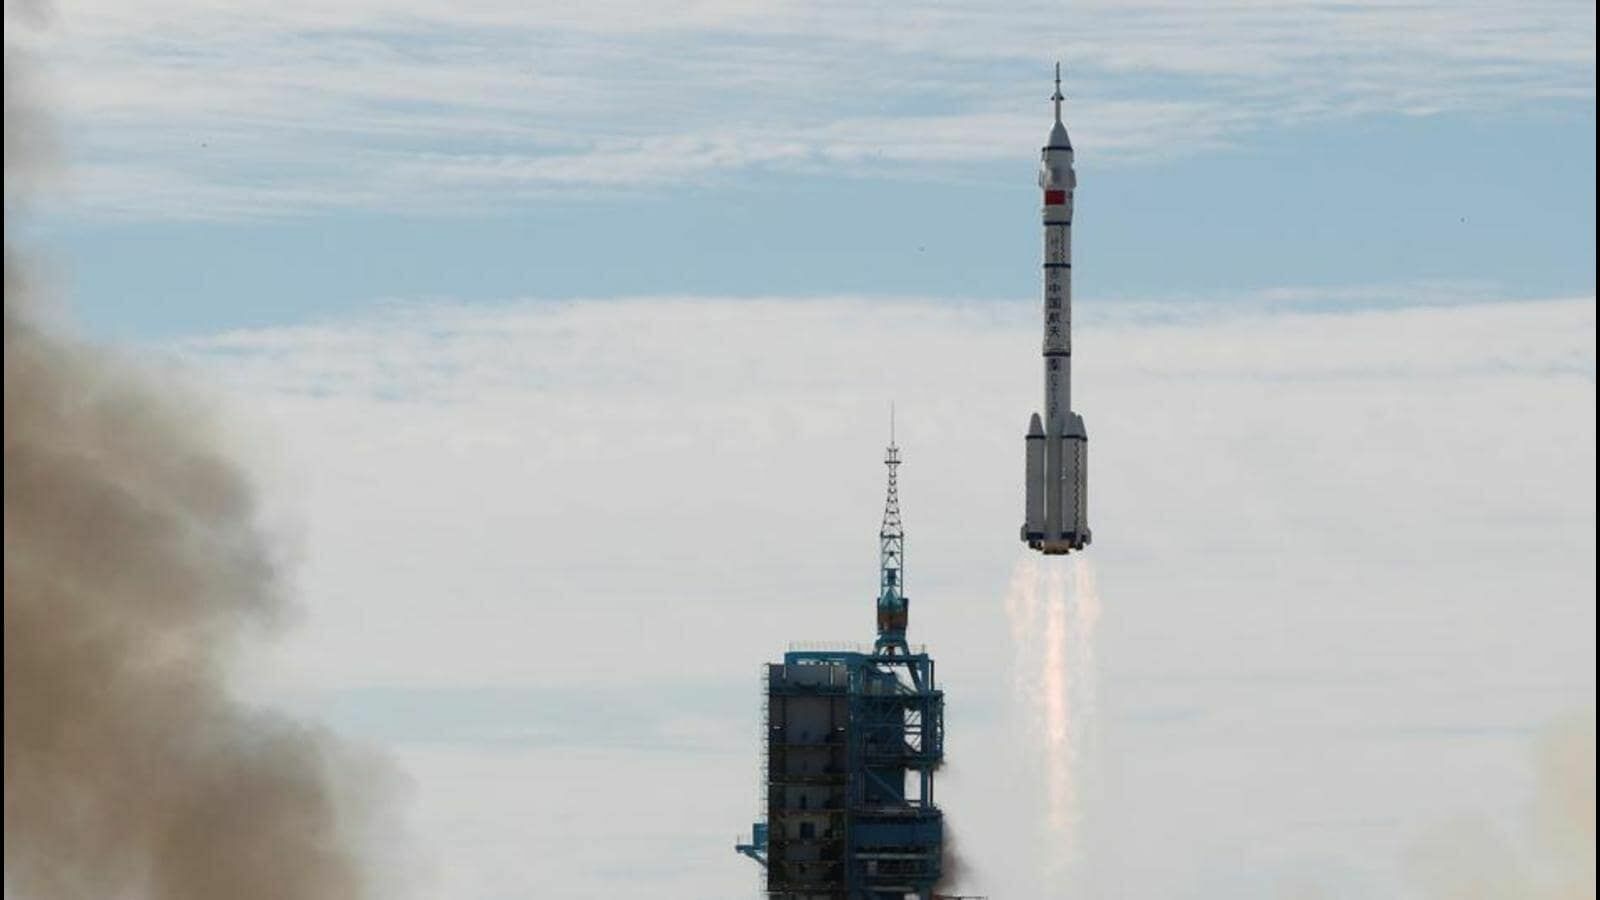 China launched the ship "Shenzhou-12" to its station